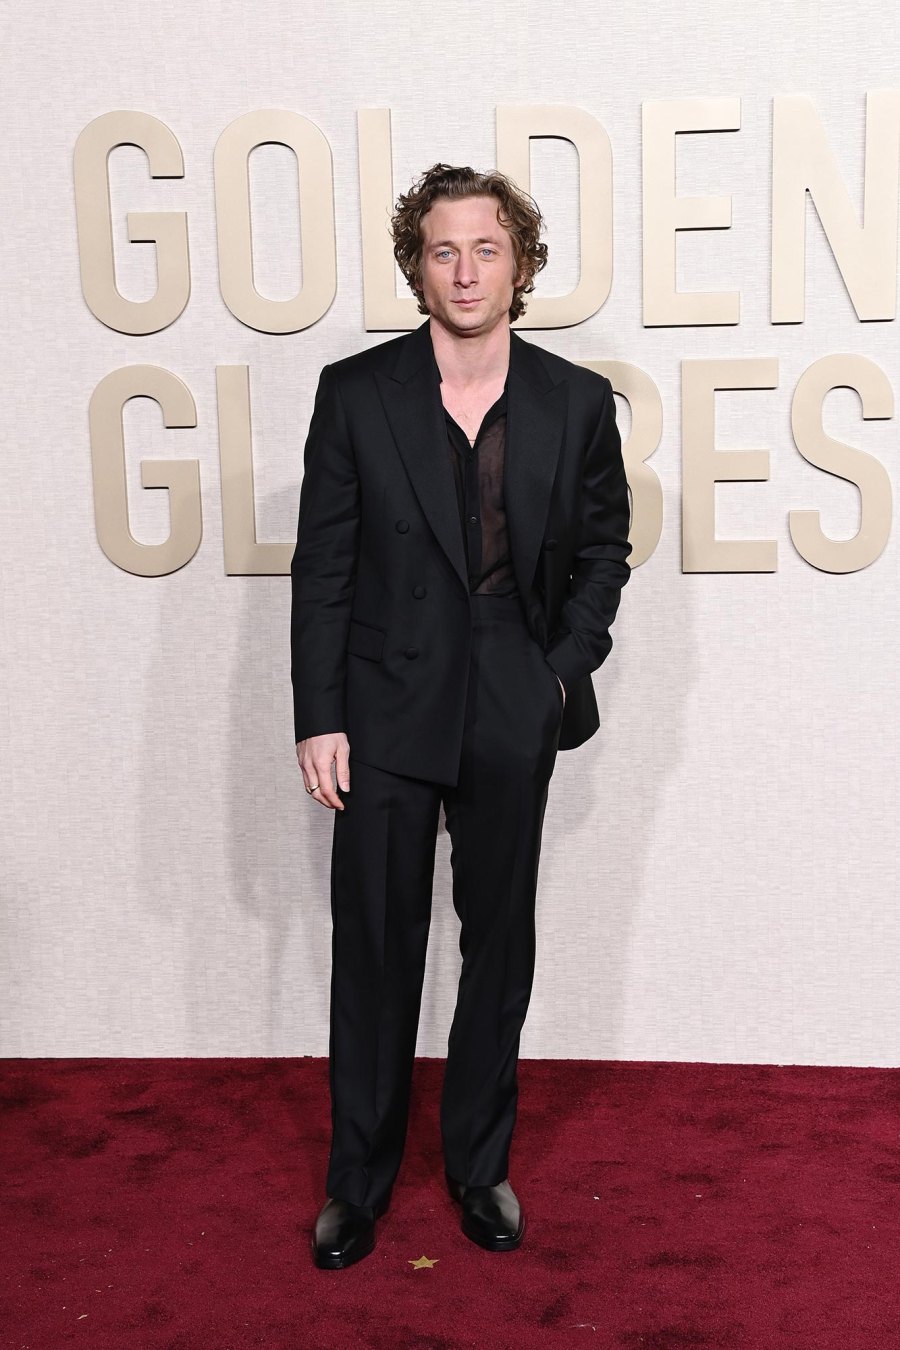 Jeremy Allen Whites Fashion Evolution From Casual to Classy